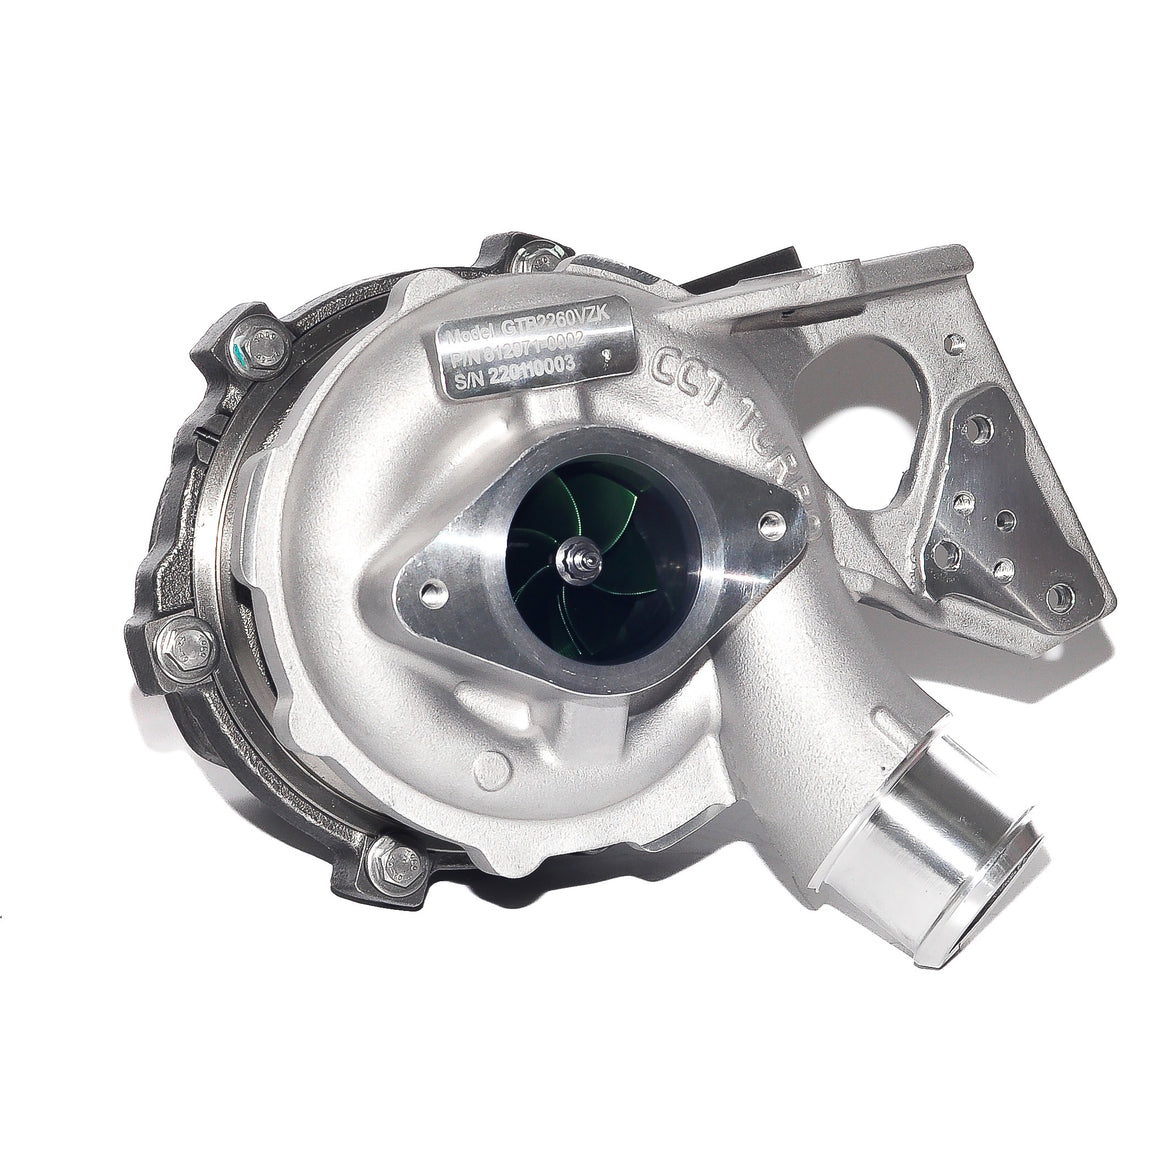 CCT Stage Two Upgrade Hi-Flow Turbocharger To Suit Ford Ranger 3.2L BK3Q-6K682-RC / 812971